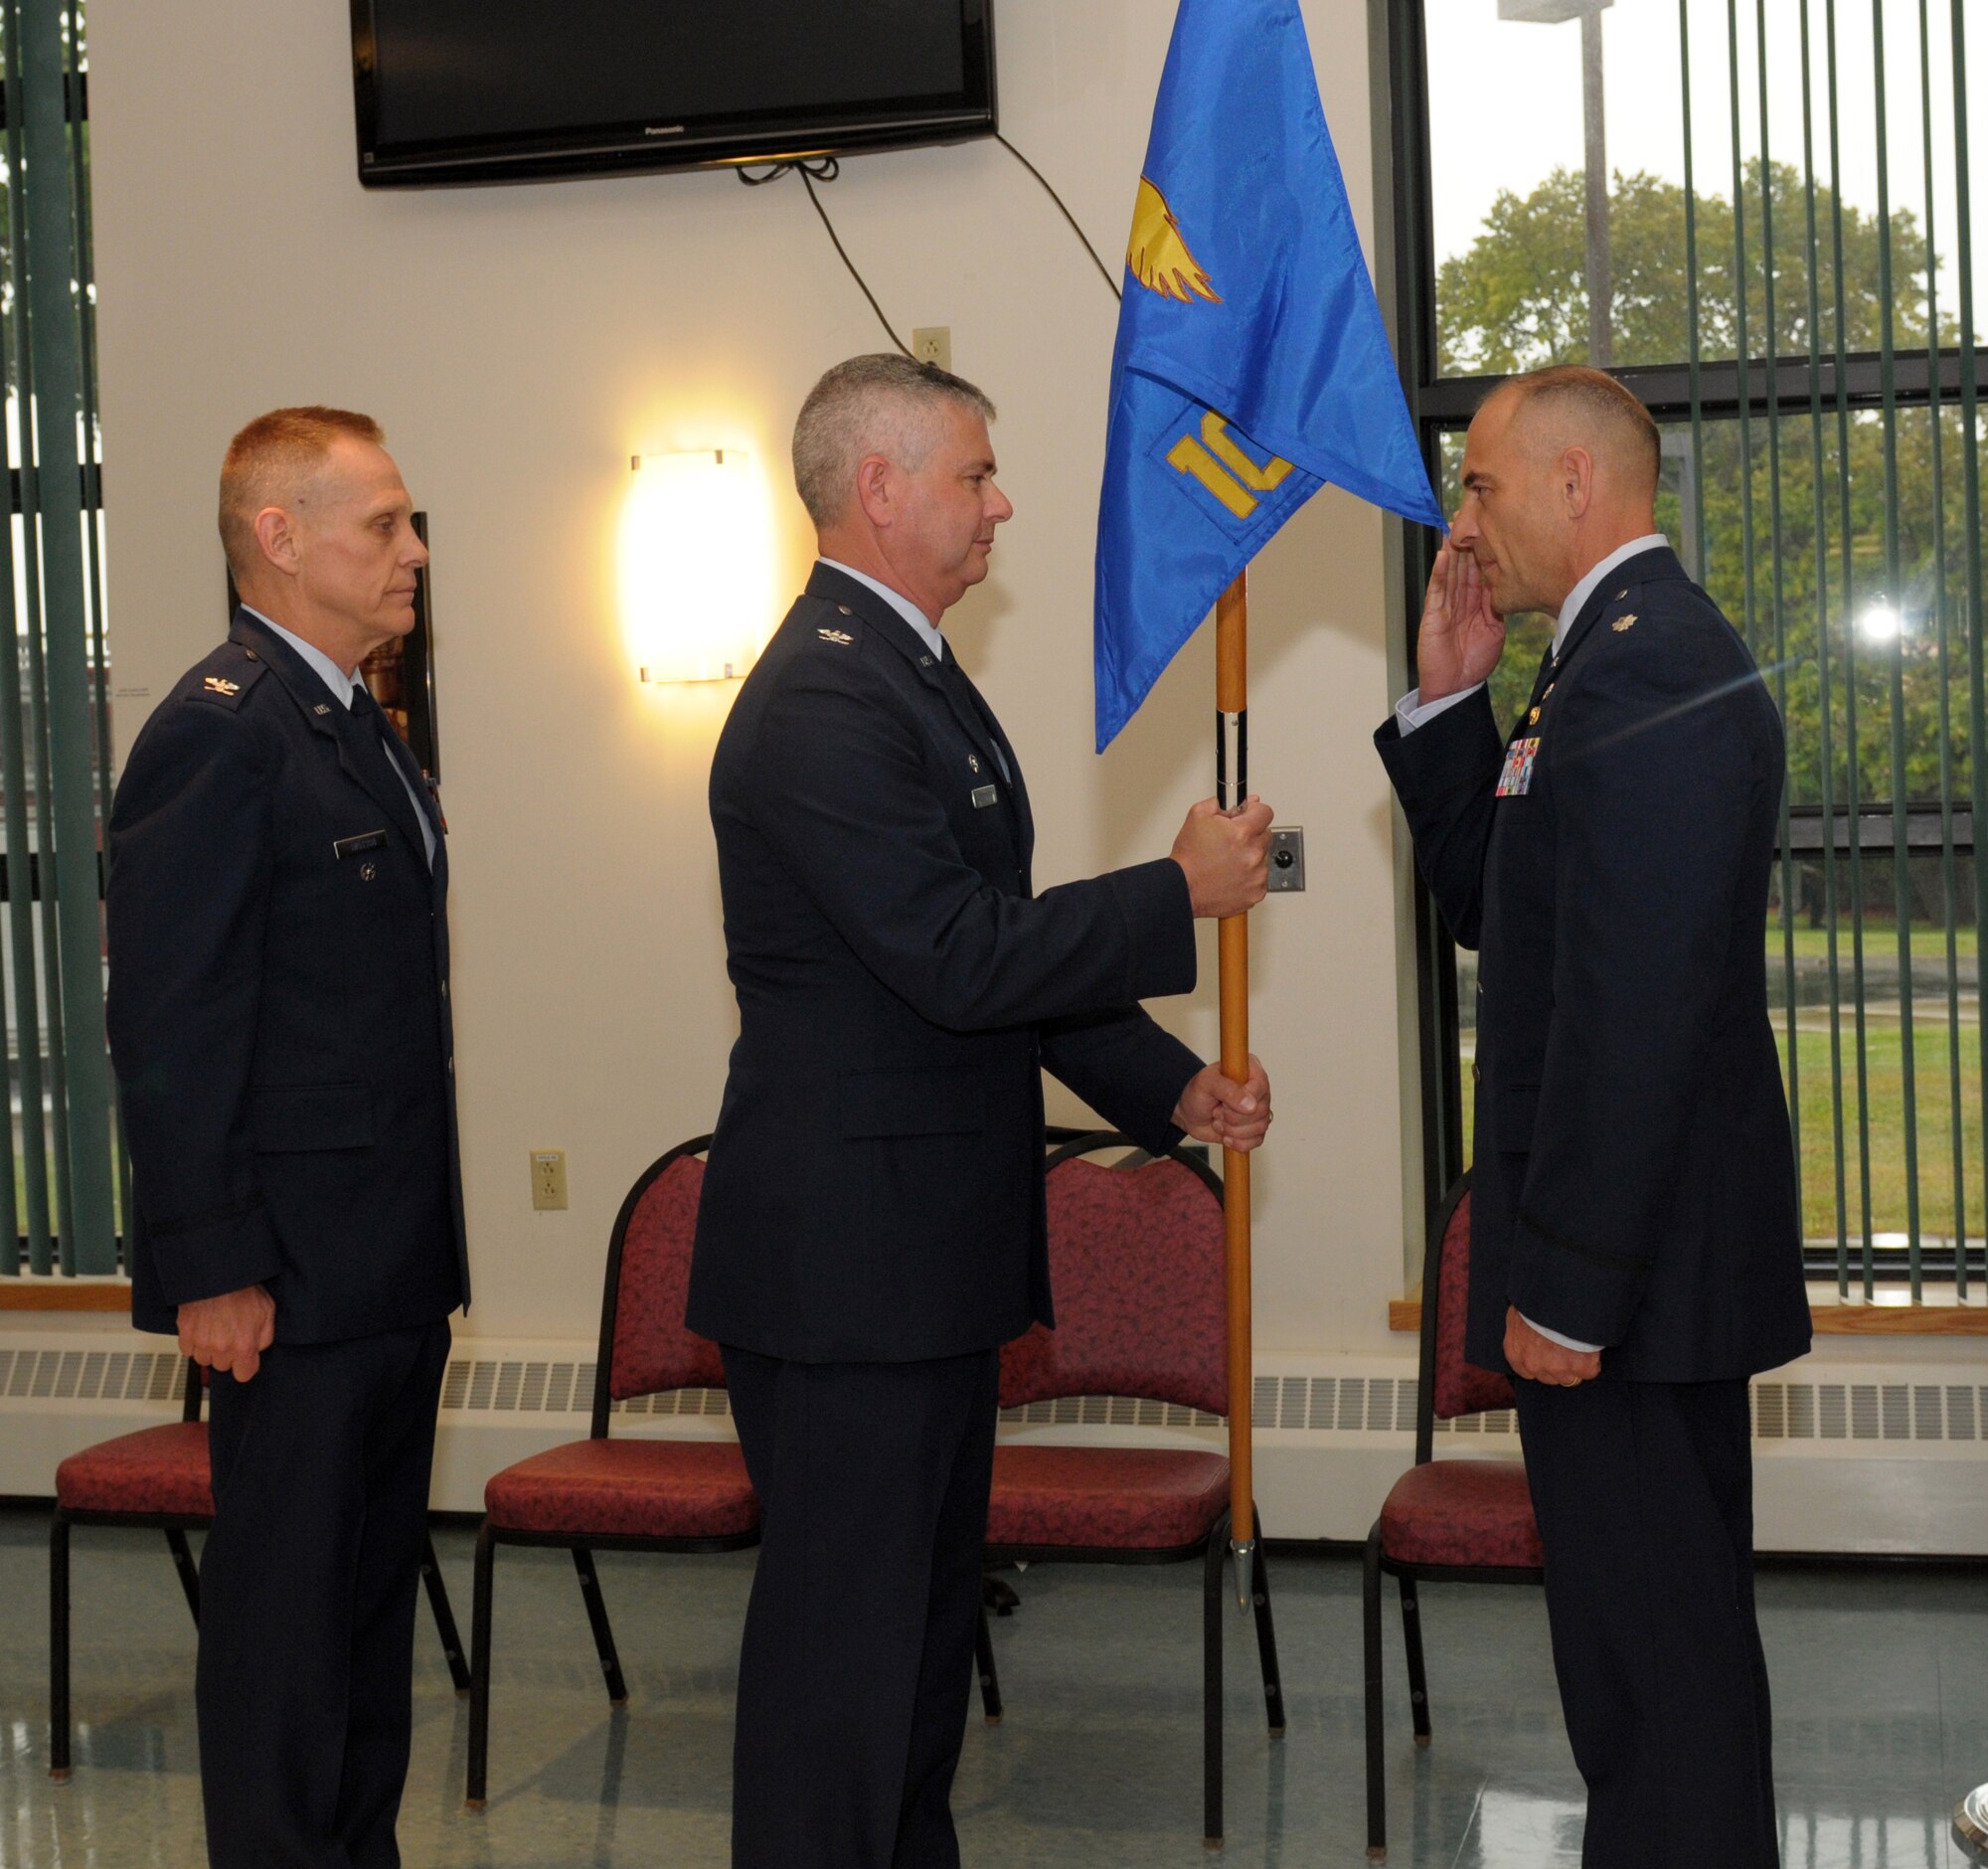 Lt. Col. Jeffrey Hedges (right) assumes command of the 109th Mission Support Group from Col. Shawn Clouthier (center), 109th Airlift Wing commander, during a change of command ceremony Sept. 13, 2014, at Stratton Air National Guard Base, N.Y. Col. Walter Wintsch (left) relinquished command during the ceremony. Hedges served as the 109th Logistics Readiness Squadron commander before taking the position as MSG commander. (U.S. Air National Guard photo by Master Sgt. William Gizara/Released)